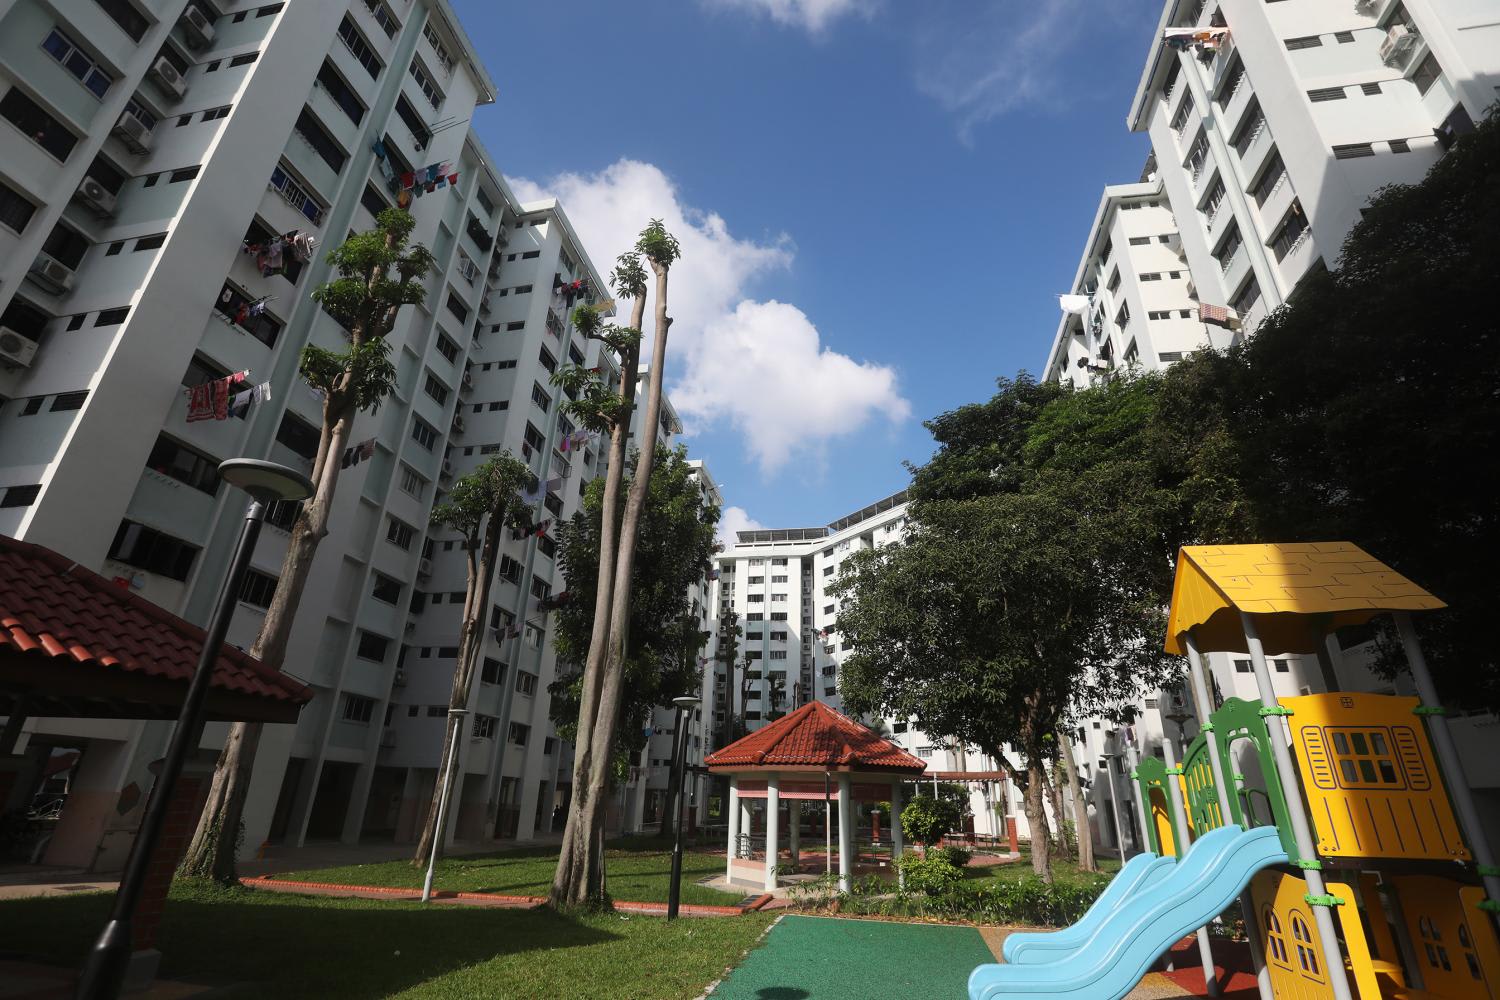 <p><span><span><span><span><span><span><span>In a letter to residents on Saturday announcing the two new options, HDB said that it recognised that “Sers can be an emotional journey" for them and that "w</span></span></span></span></span></span></span><span><span><span><span><span><span><span>e hear you and understand your concerns”. </span></span></span></span></span></span></span></p>
<br />
<br />
&nbsp;